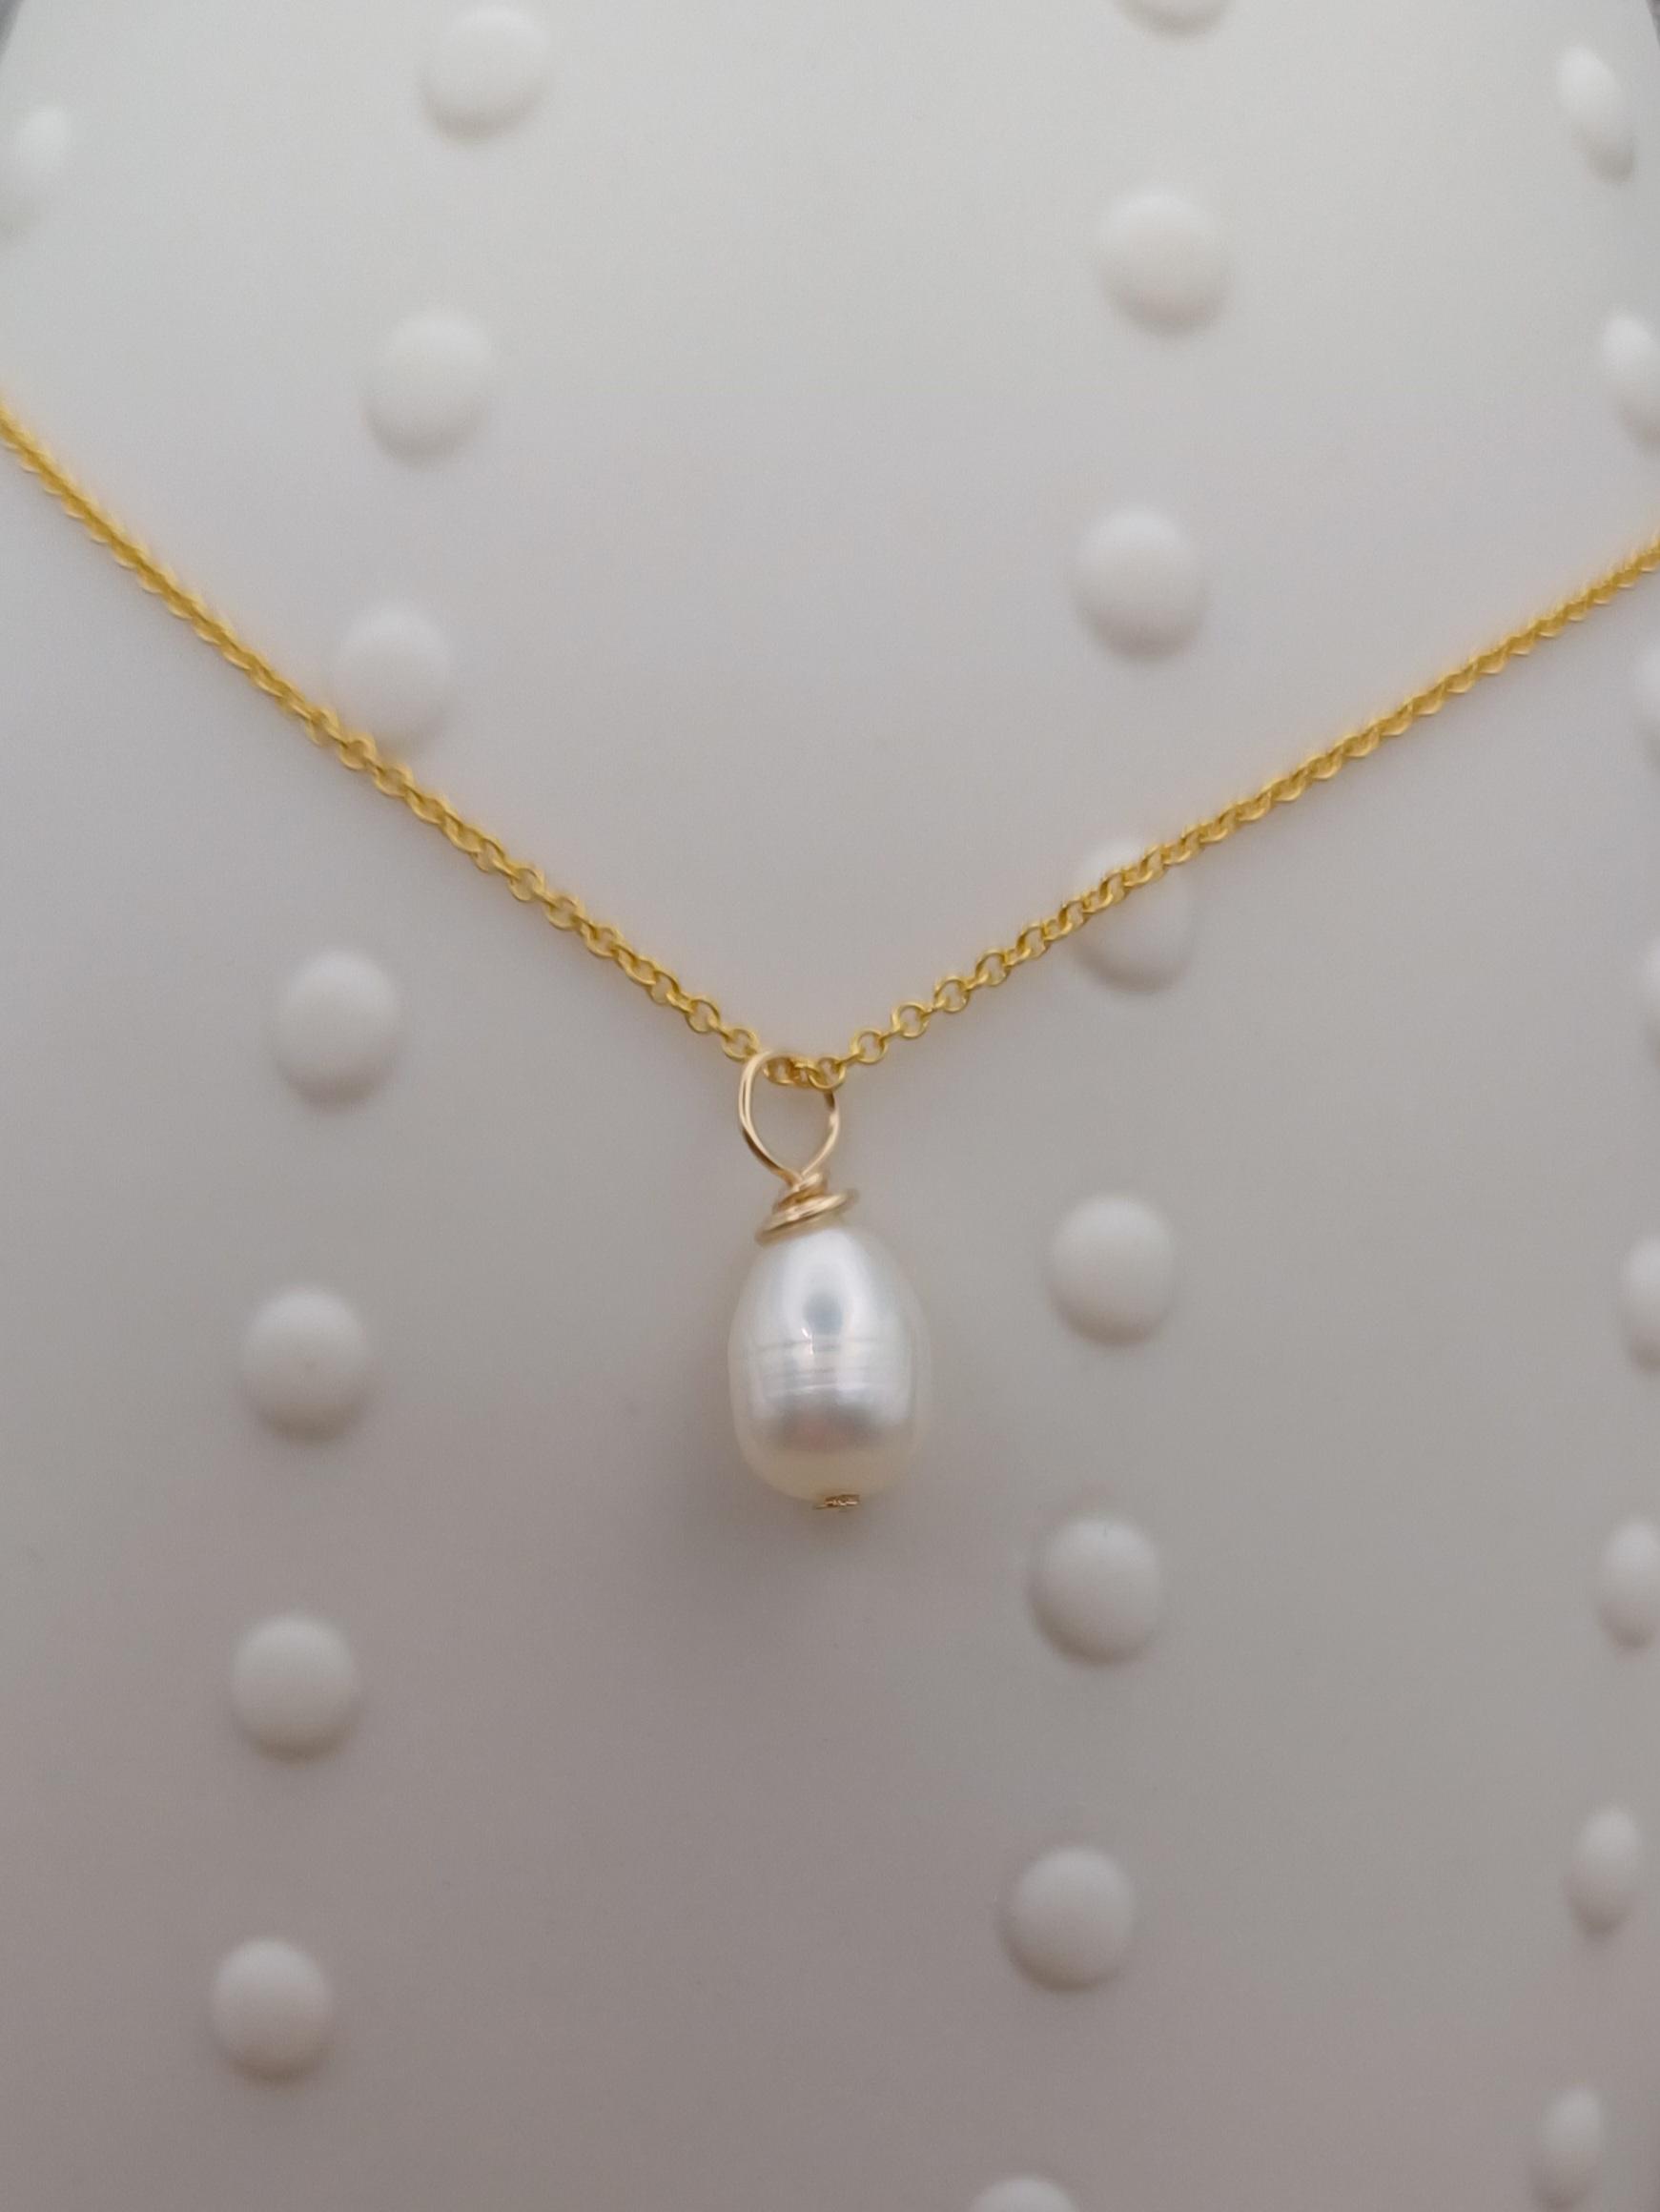 NECKLACES - 14k Gold Dainty Pearl Necklace